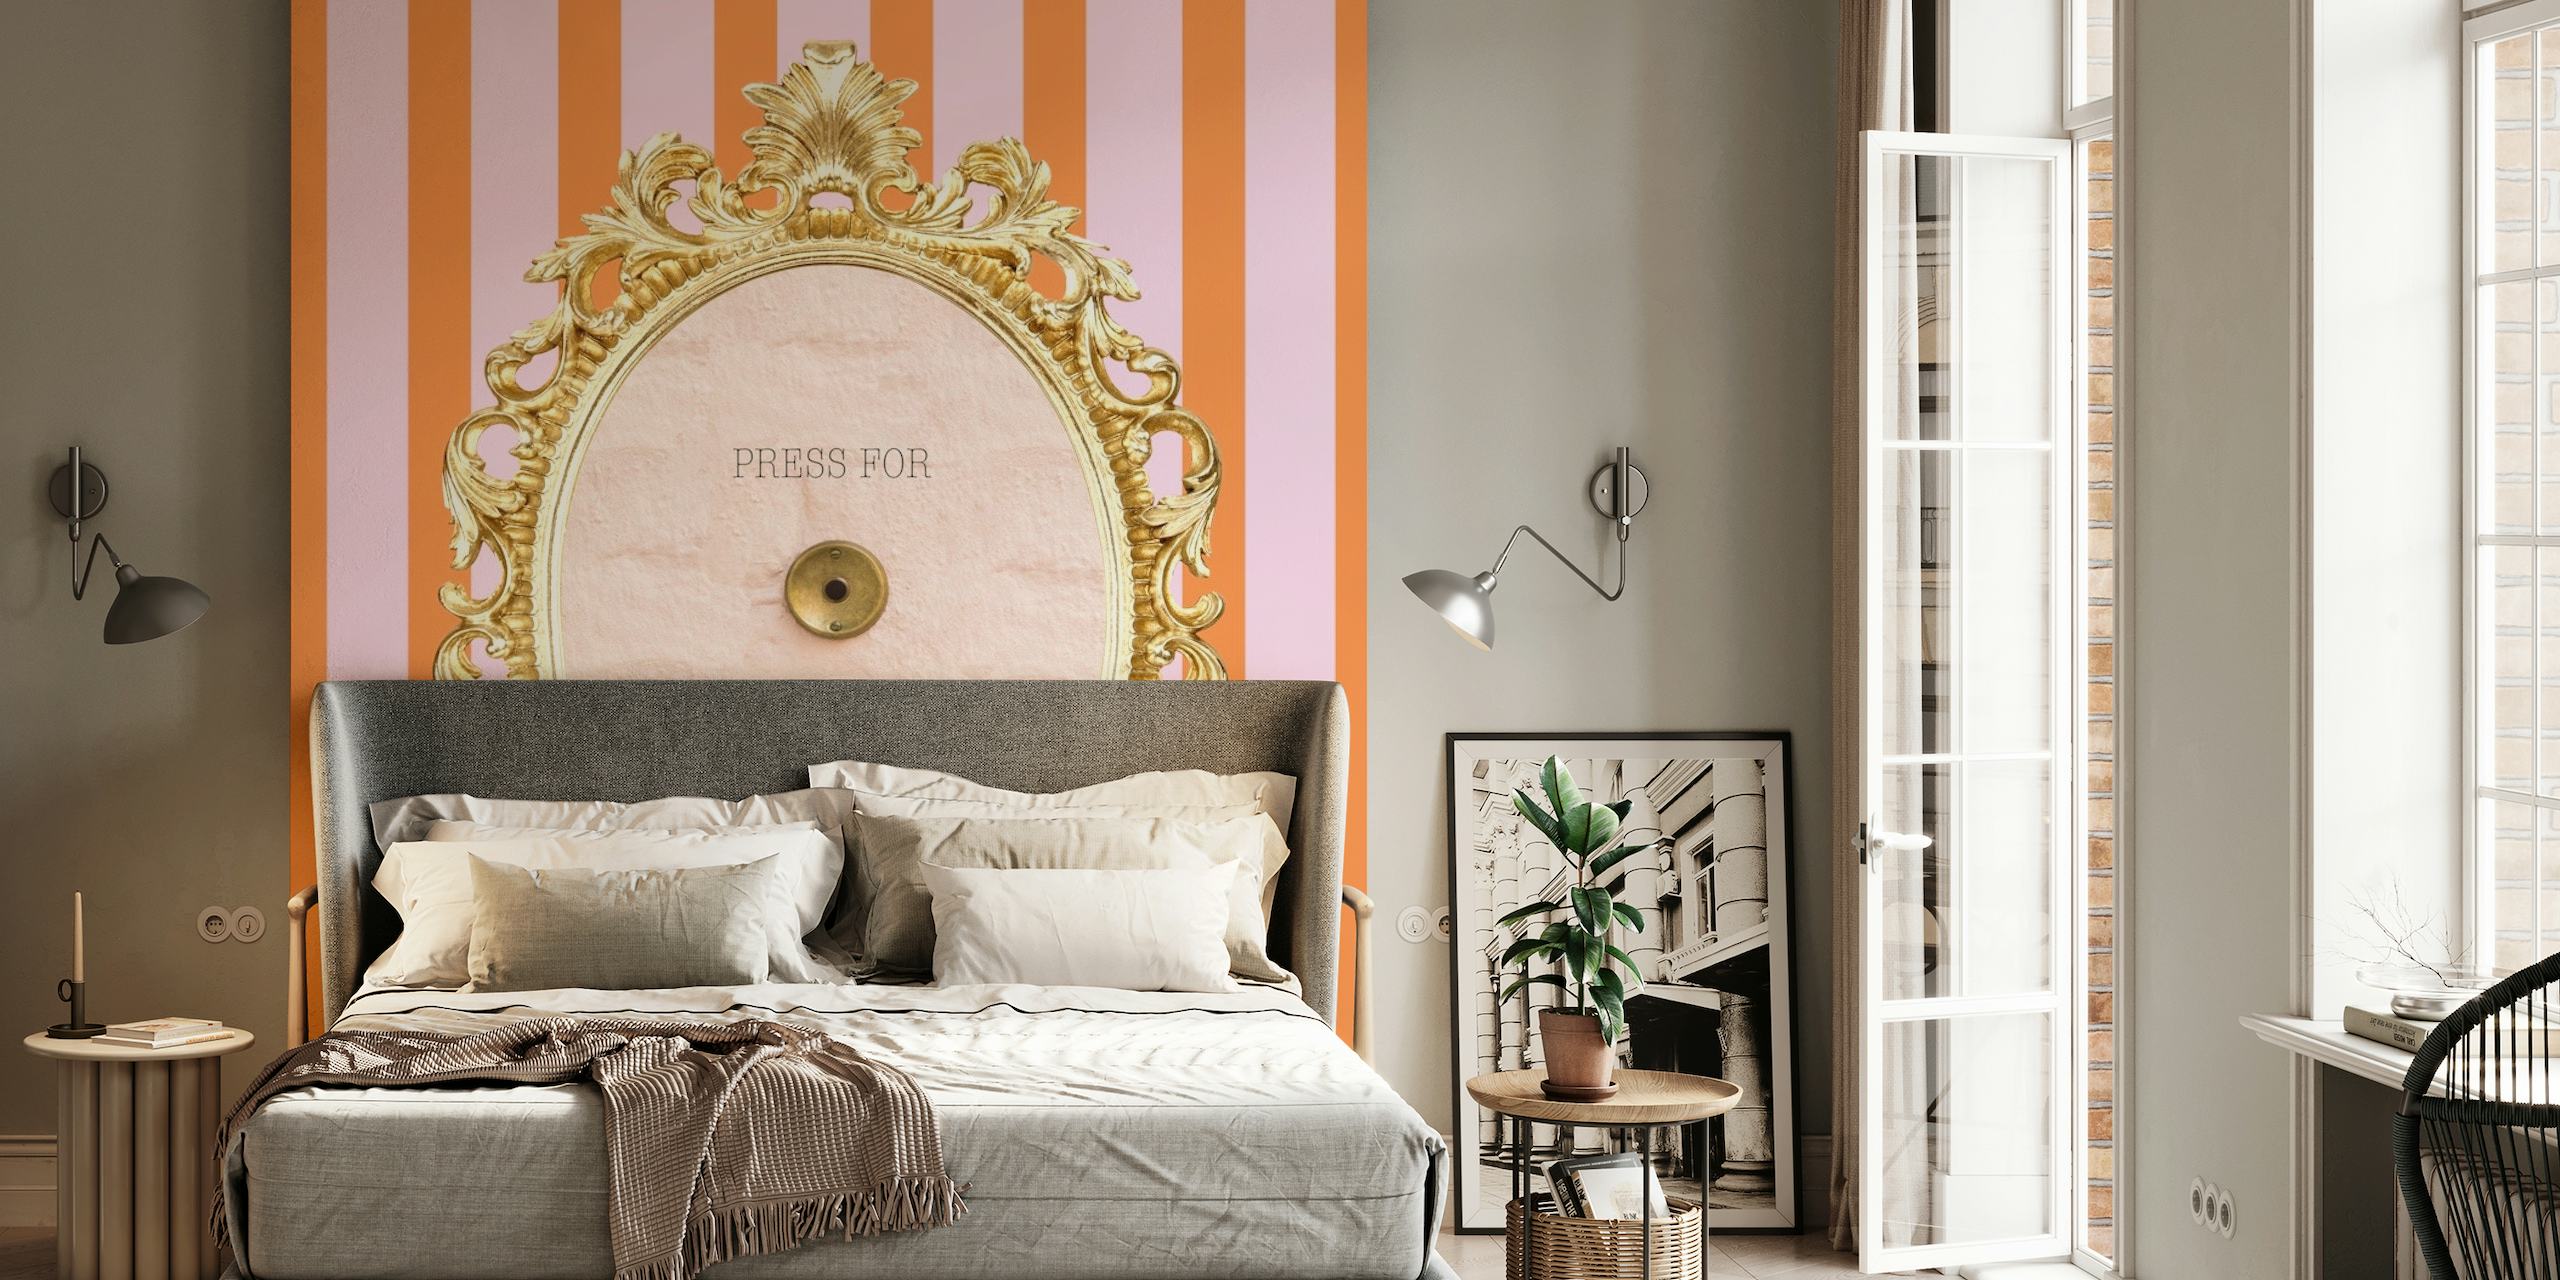 Peach and white striped wall mural with a vintage gold picture frame and 'Press for Champagne' text